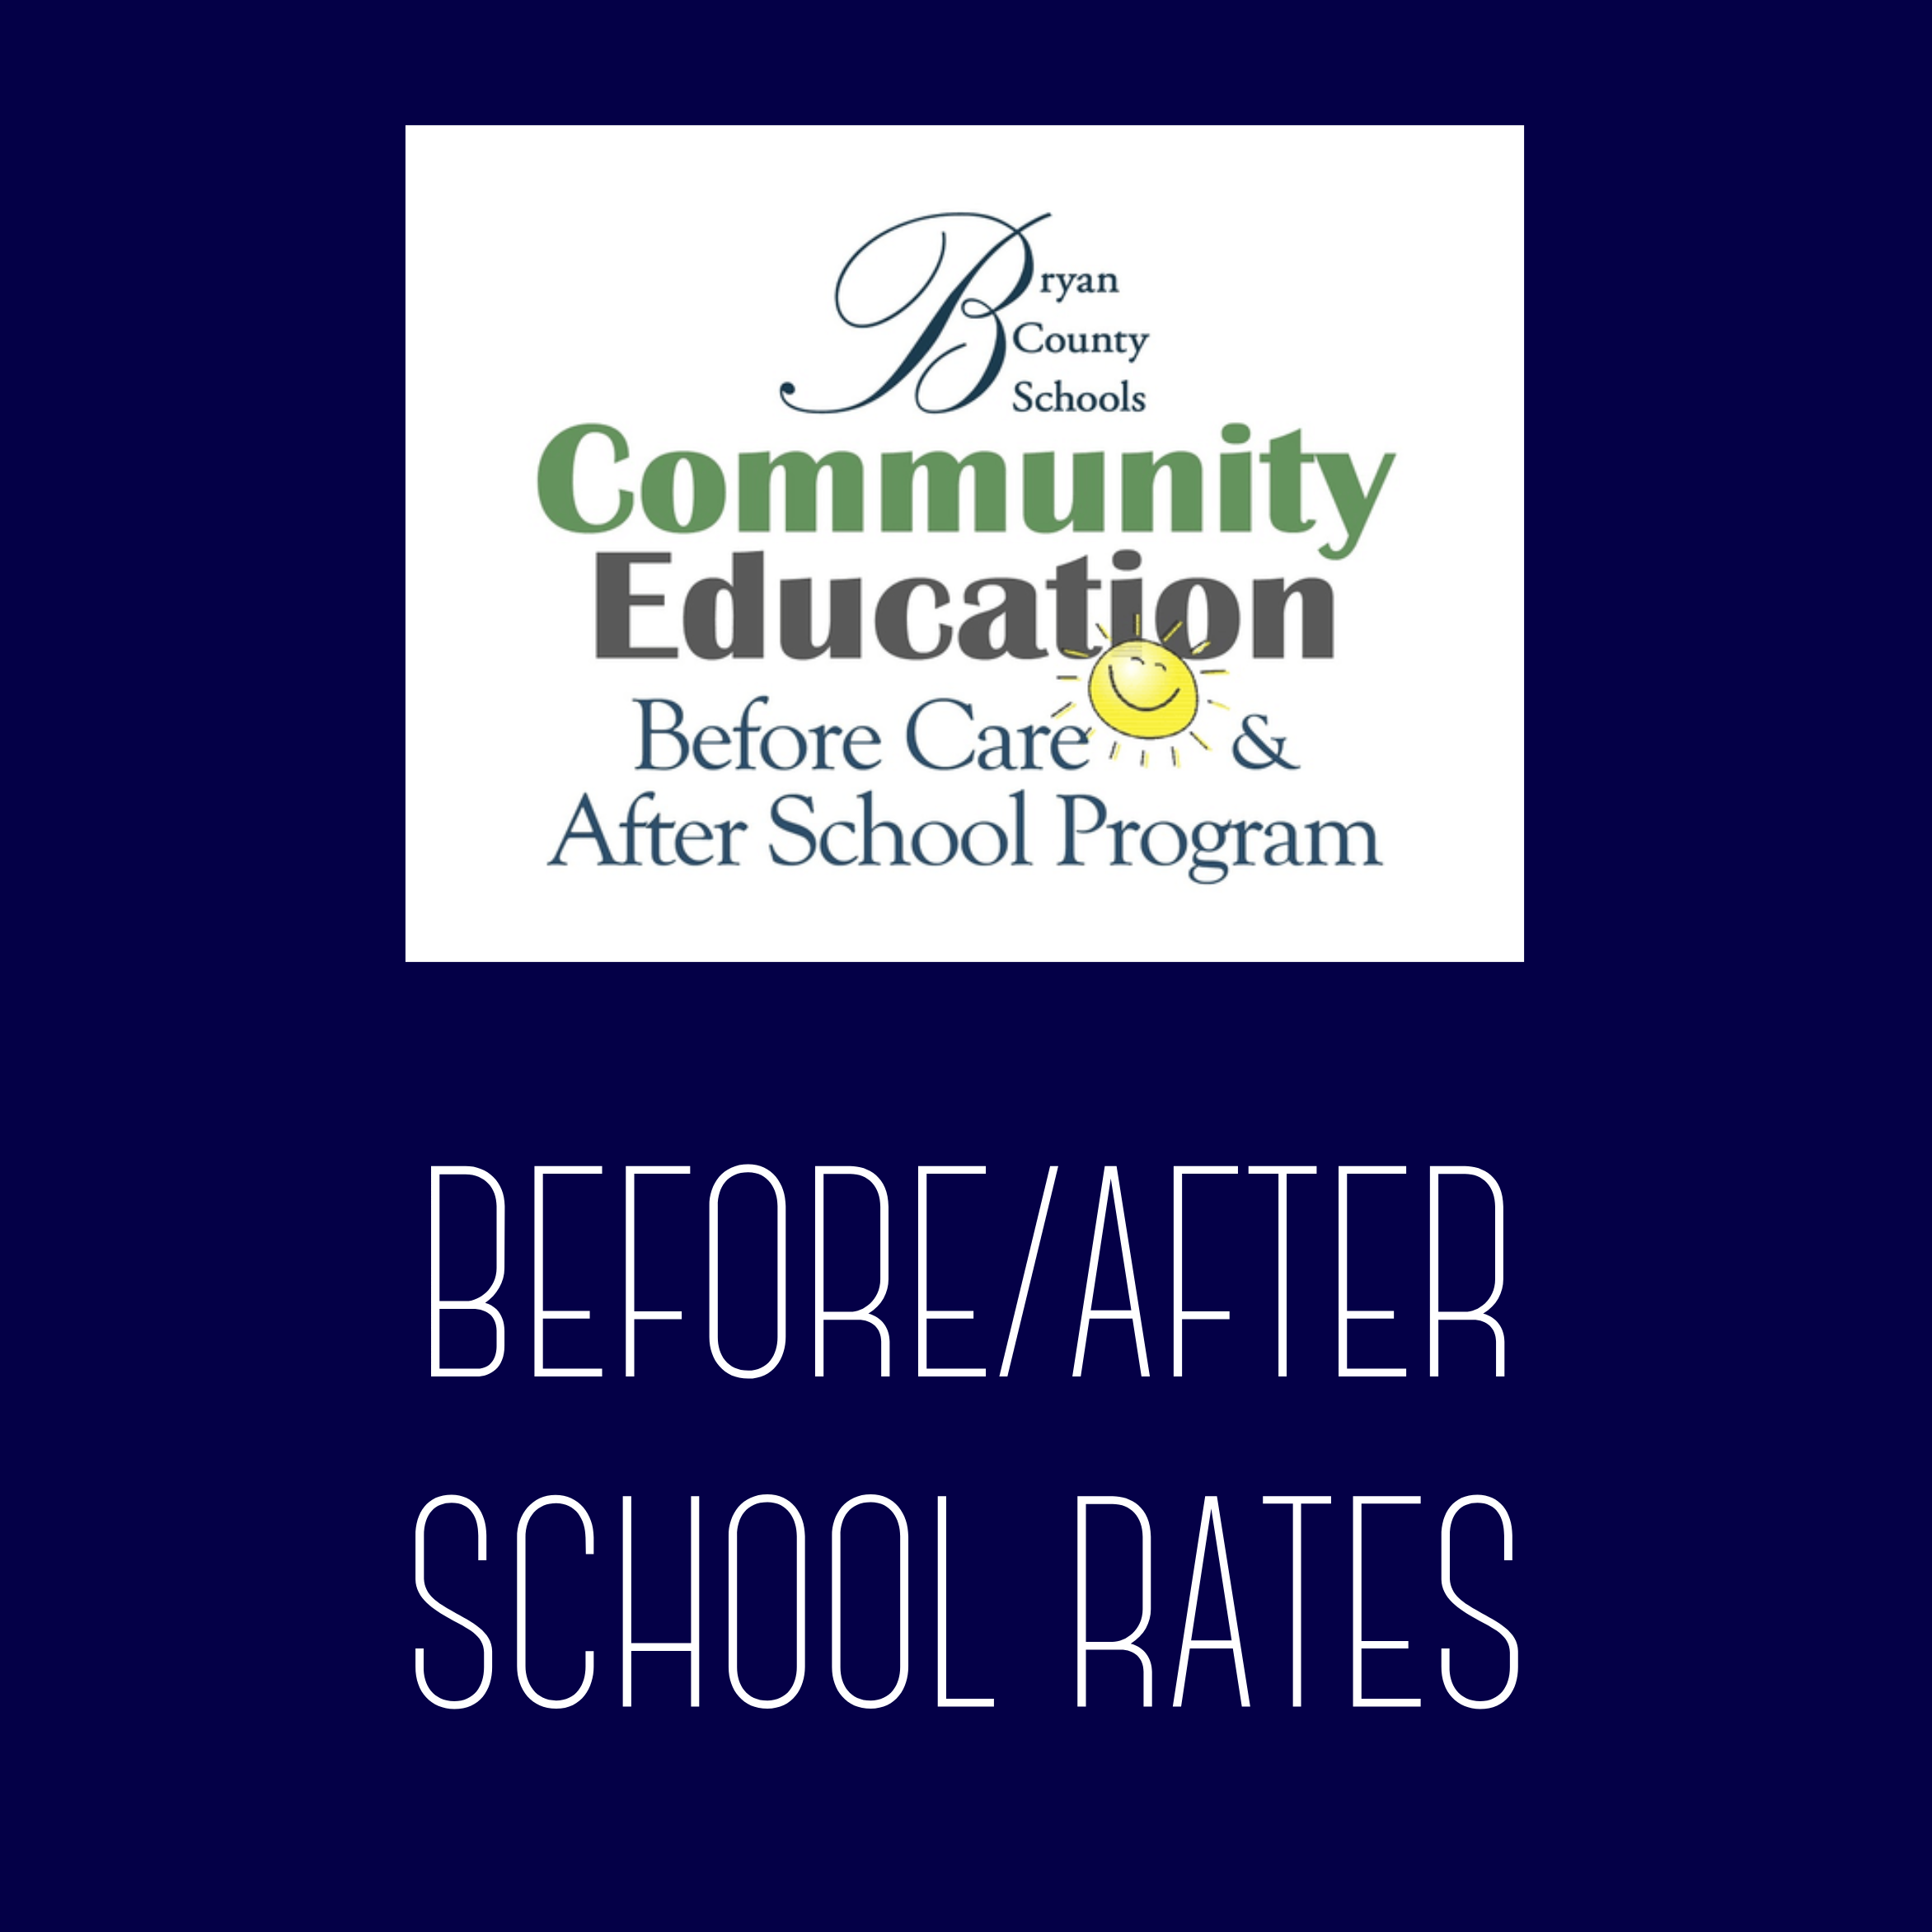 Community Education - Serving RHPS, RHES, CES, and RHMS